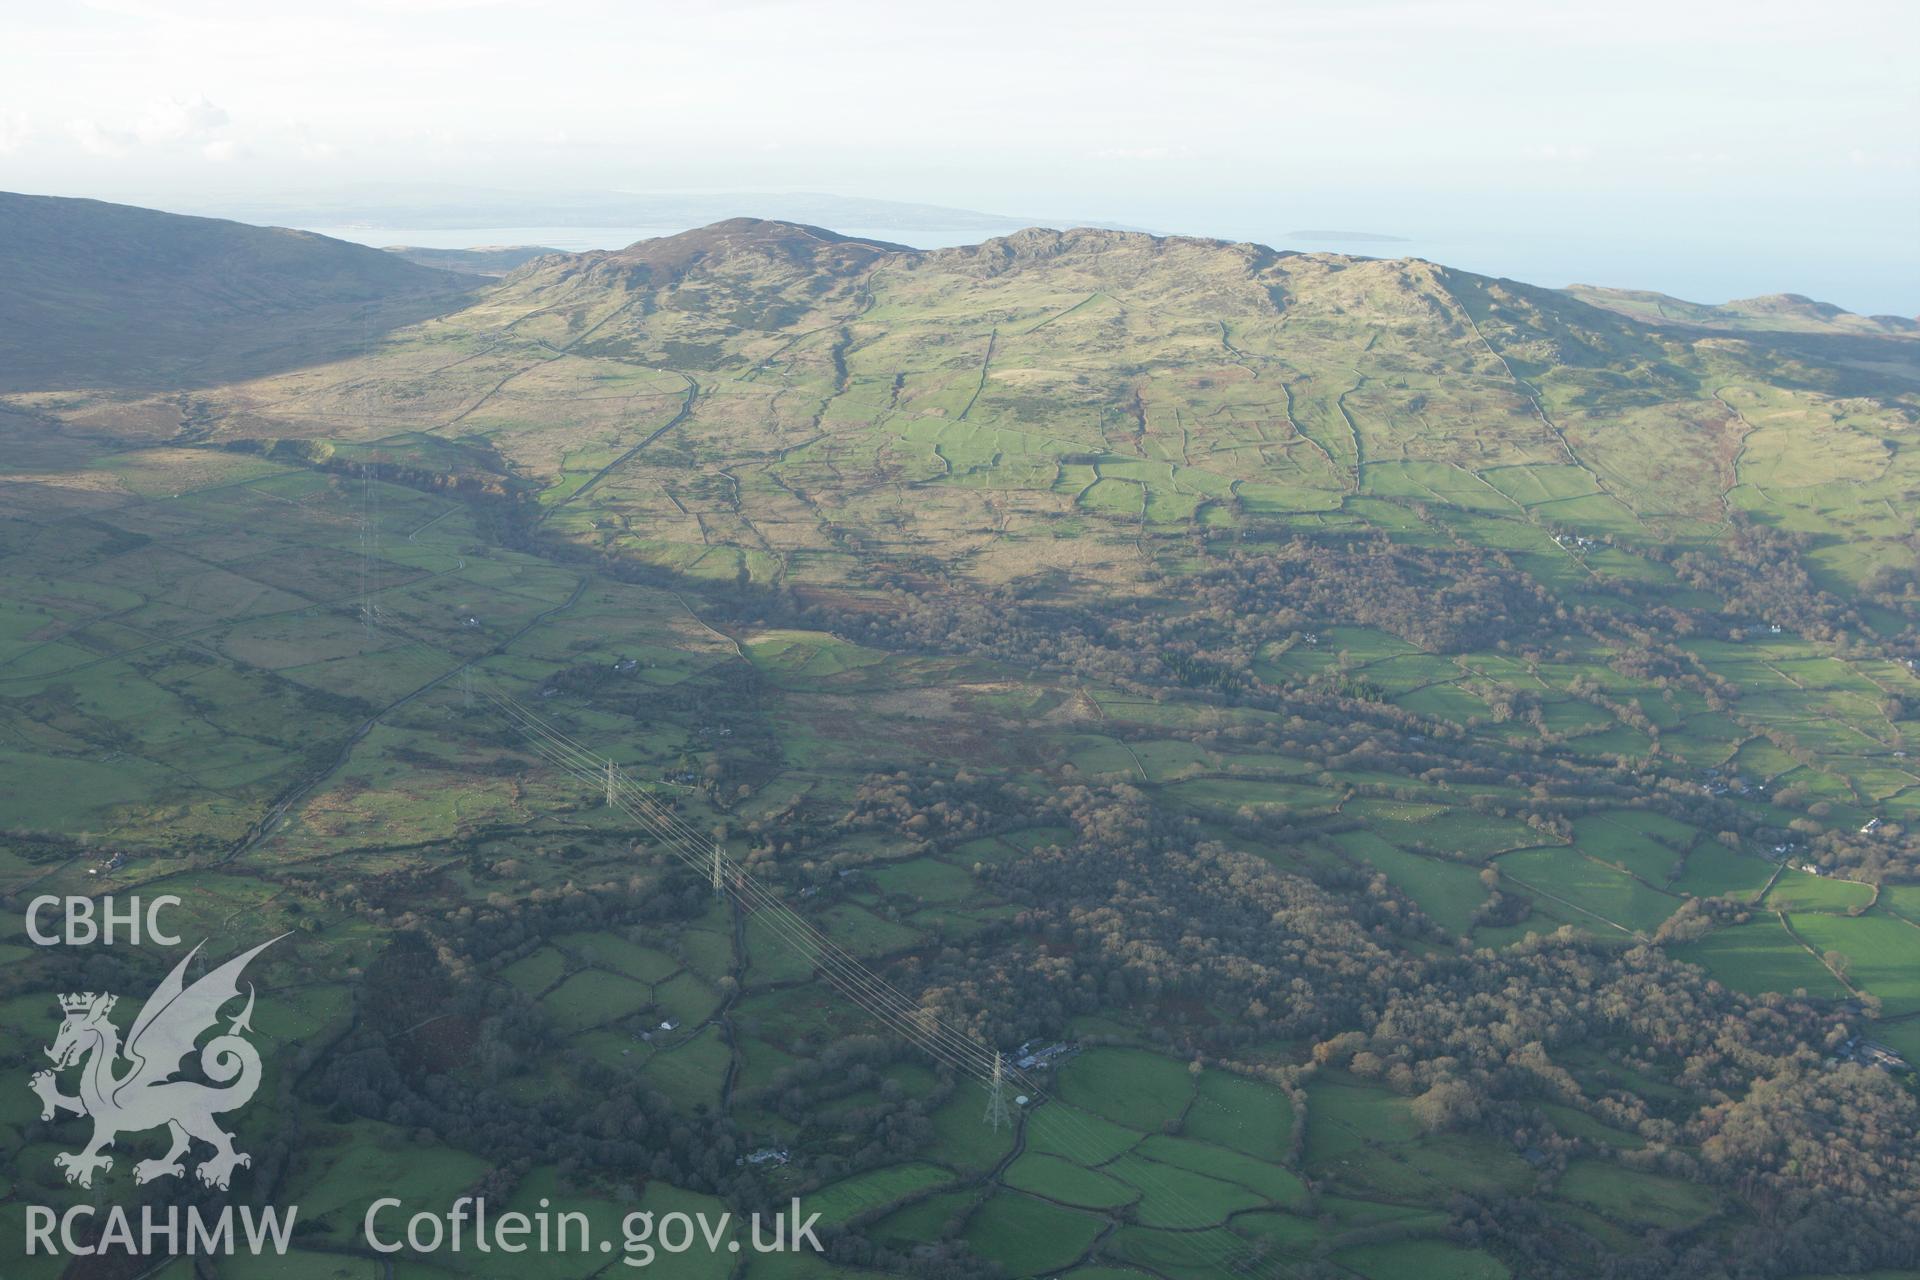 RCAHMW colour oblique aerial photograph of Maen-y-Bardd Settlement and field systems, in landscape from south-east Taken on 10 December 2009 by Toby Driver